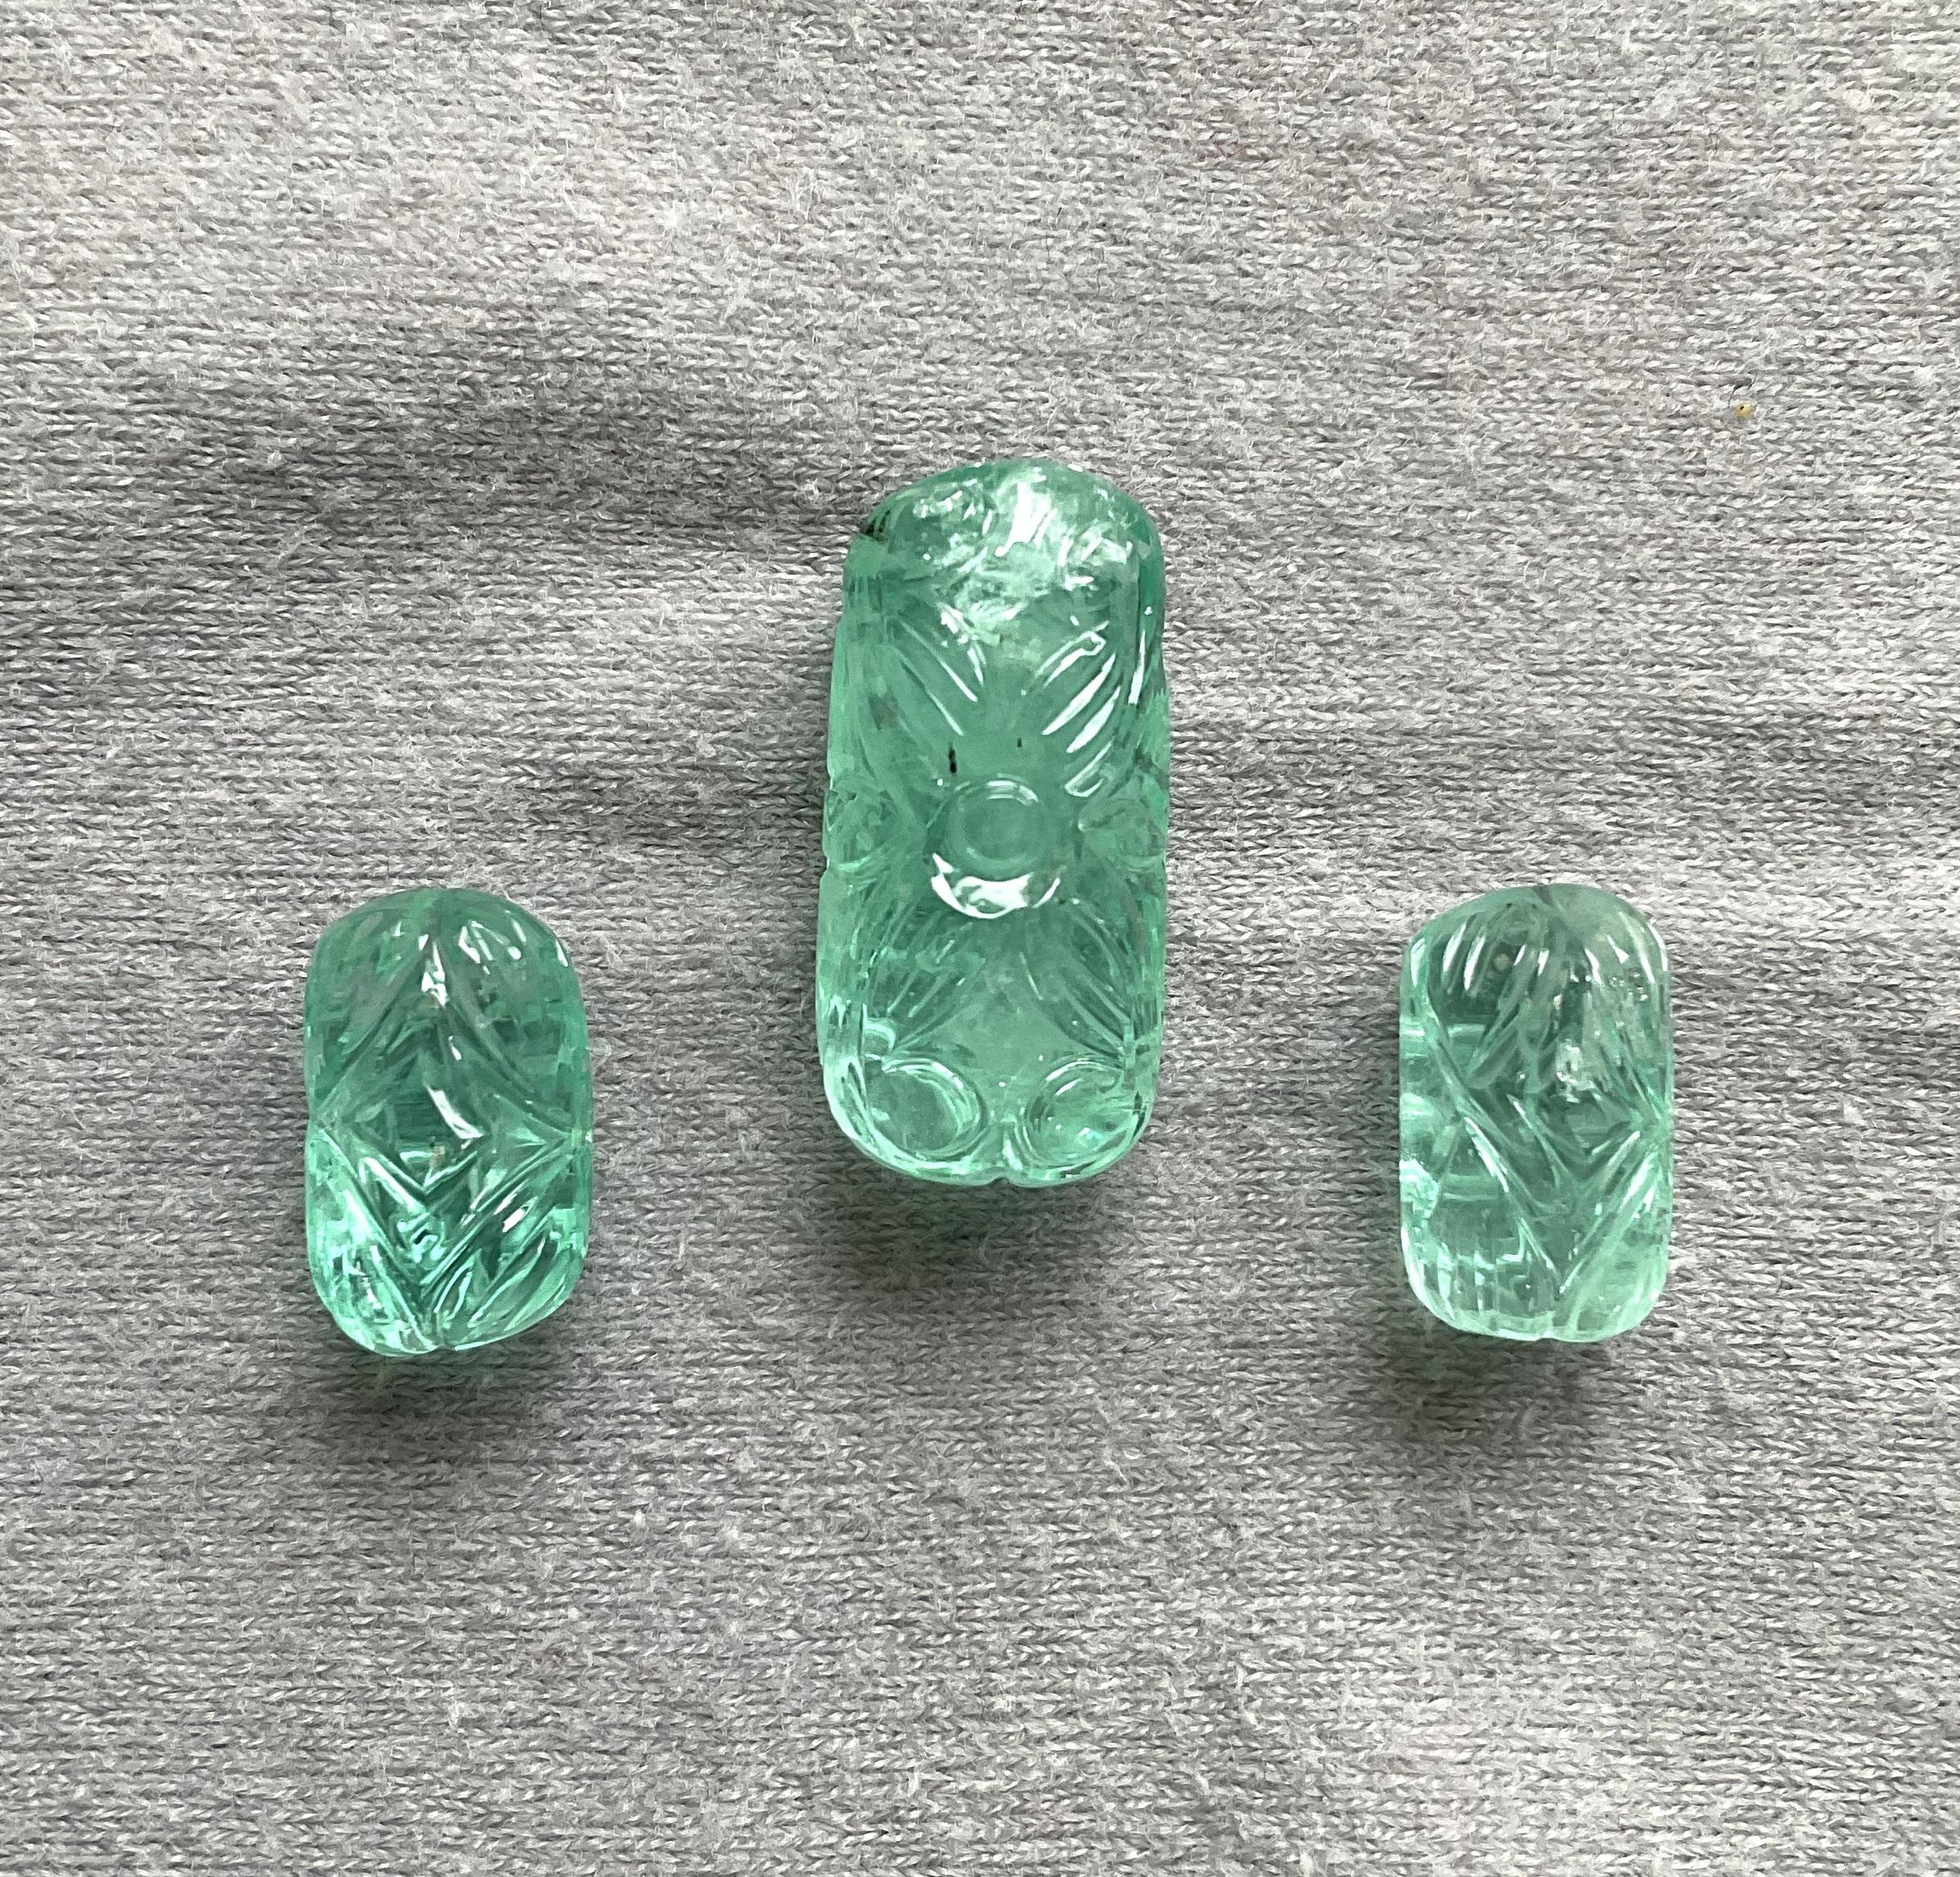 39.93 Carats Russian Emerald Carved 3 Pieces Layout For Jewelry Natural Gemstone

Gemstone - Emerald
Weight  - 39.93 Carats
Size - 9x15 To 11x23 MM
Shape - Carved Fancy
Quantity - 3 Pieces